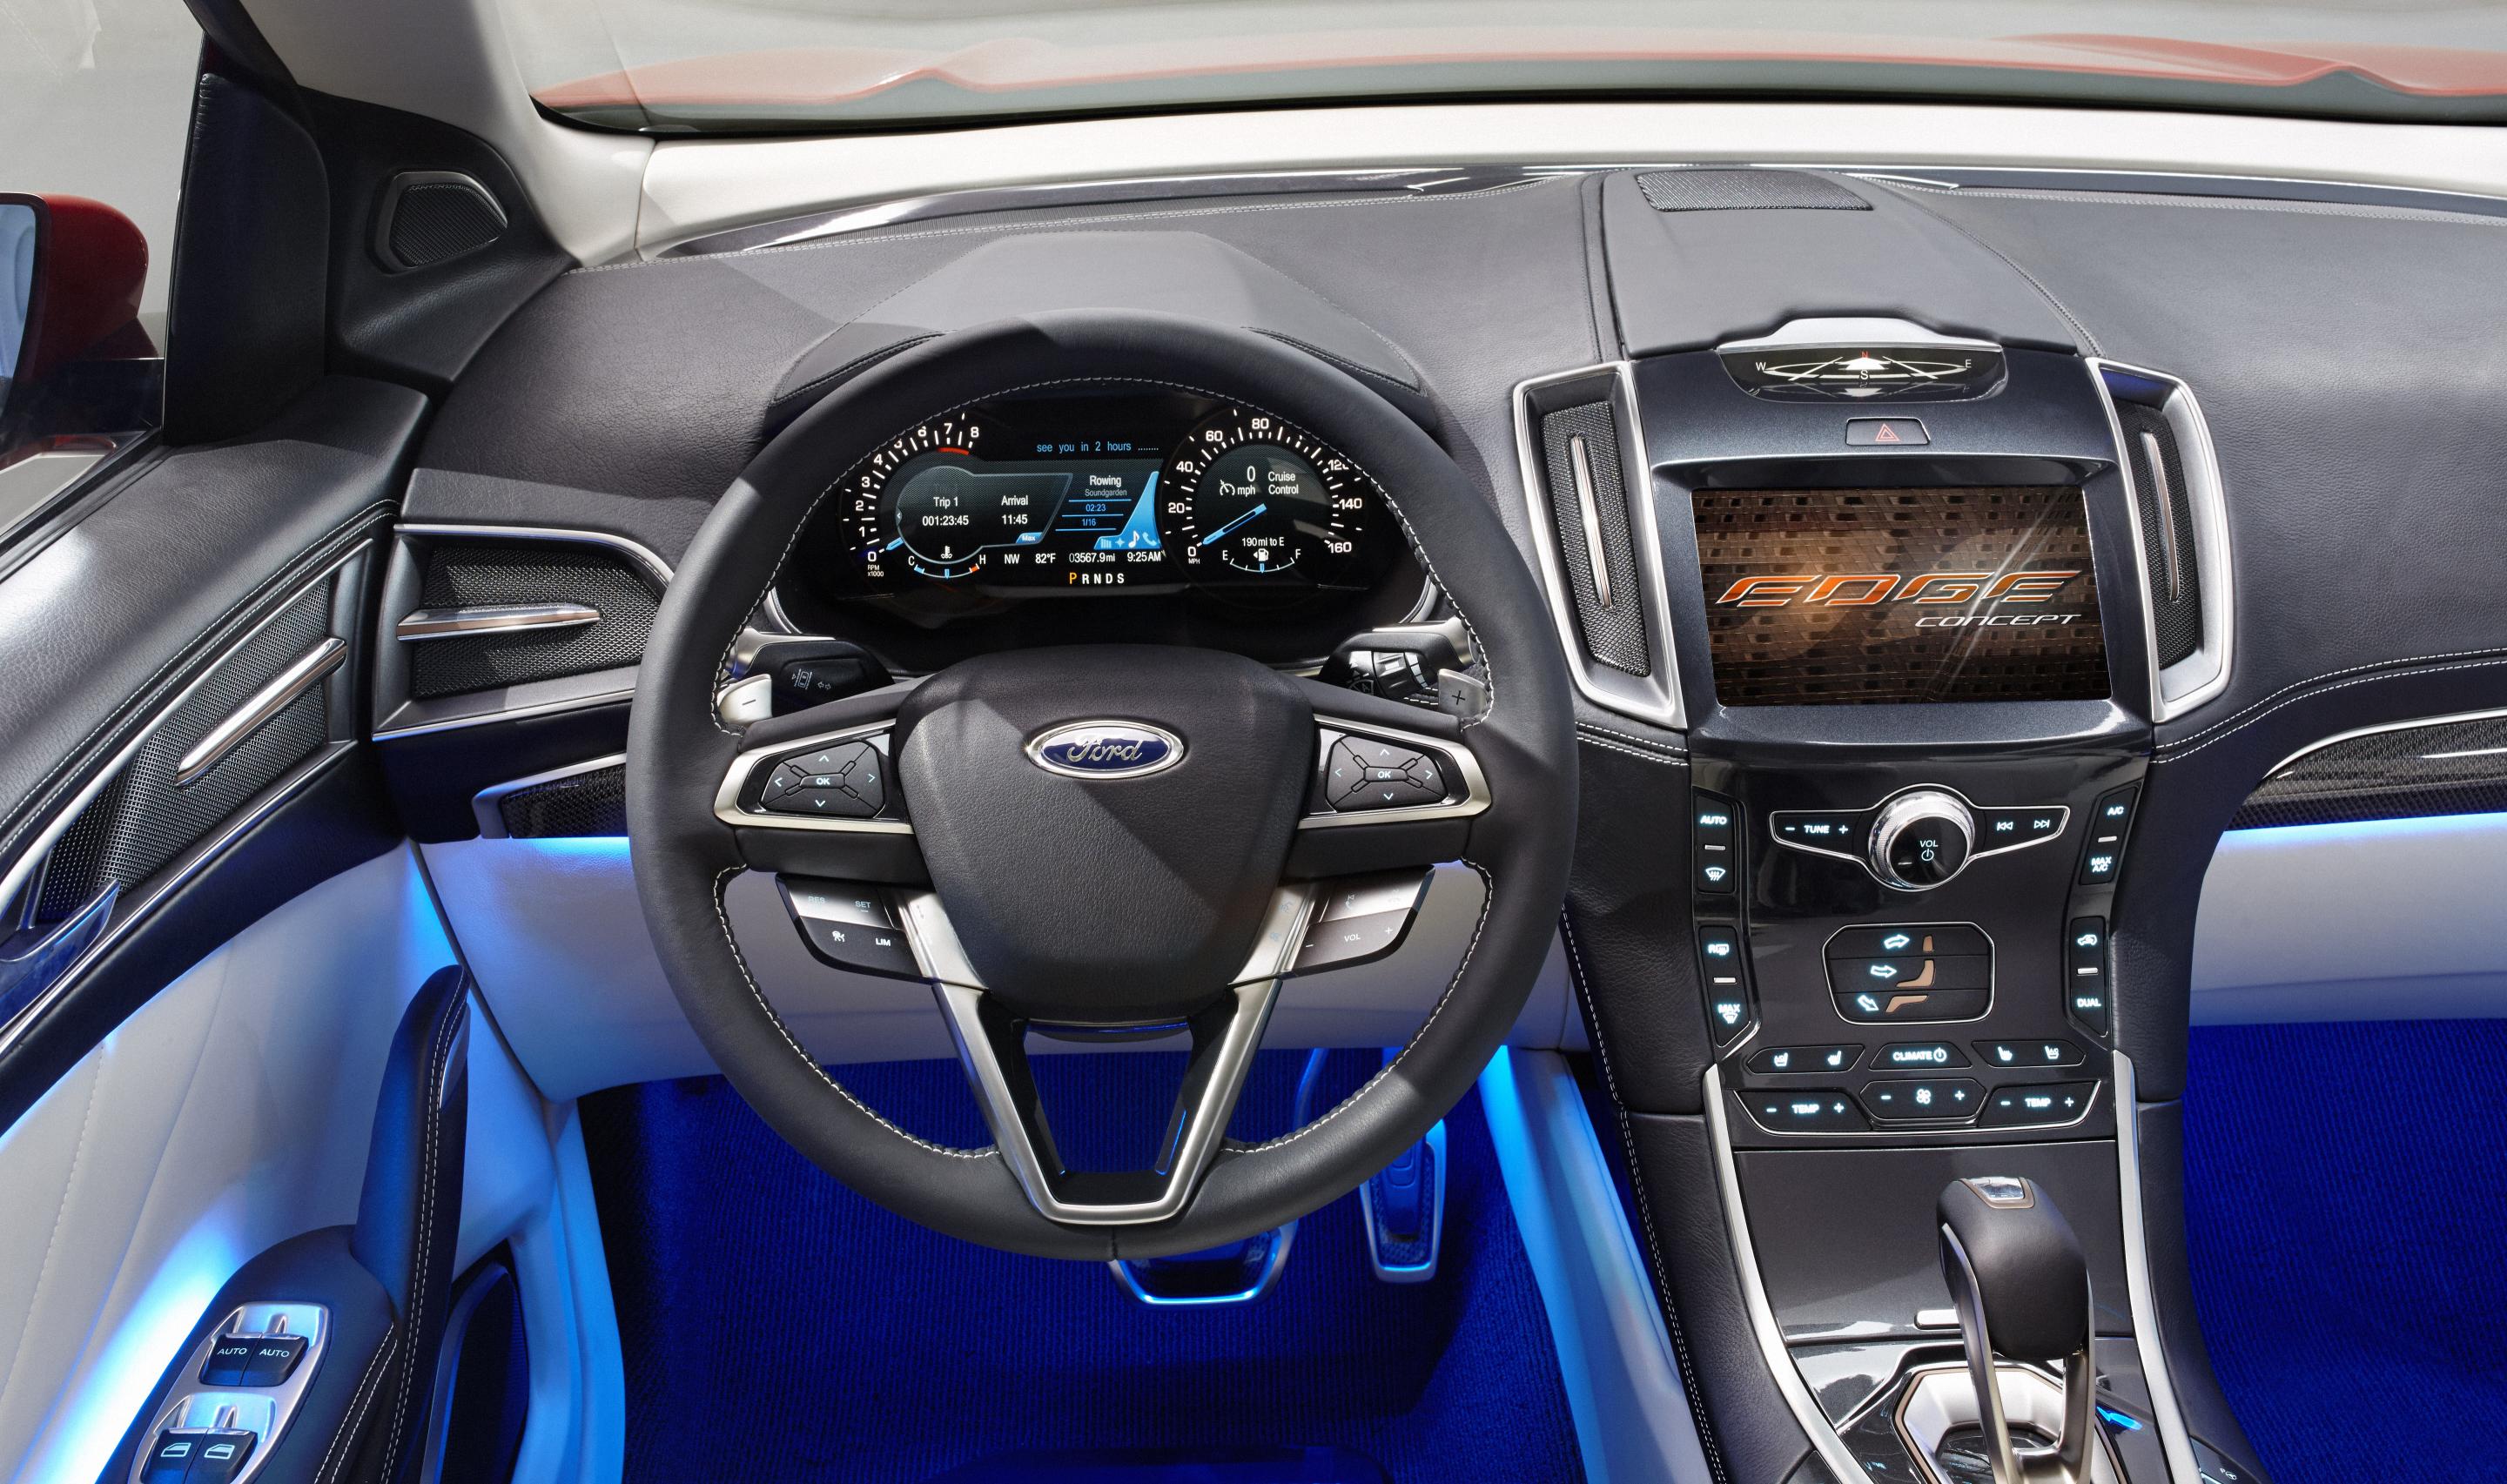 Ford moves to cutting edge phase of autonomous car development